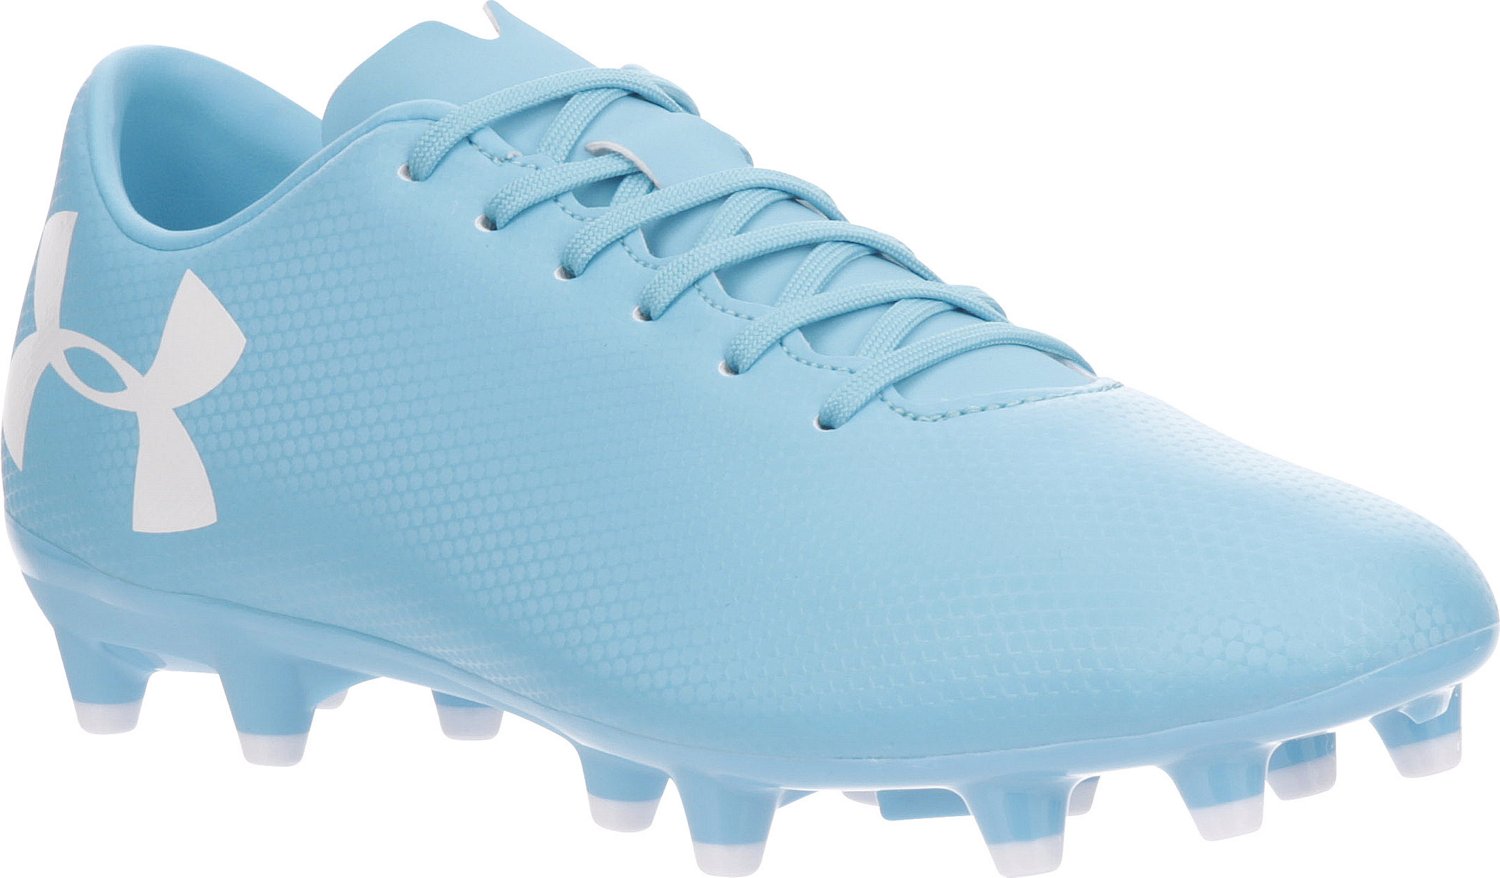 under armor soccer shoes